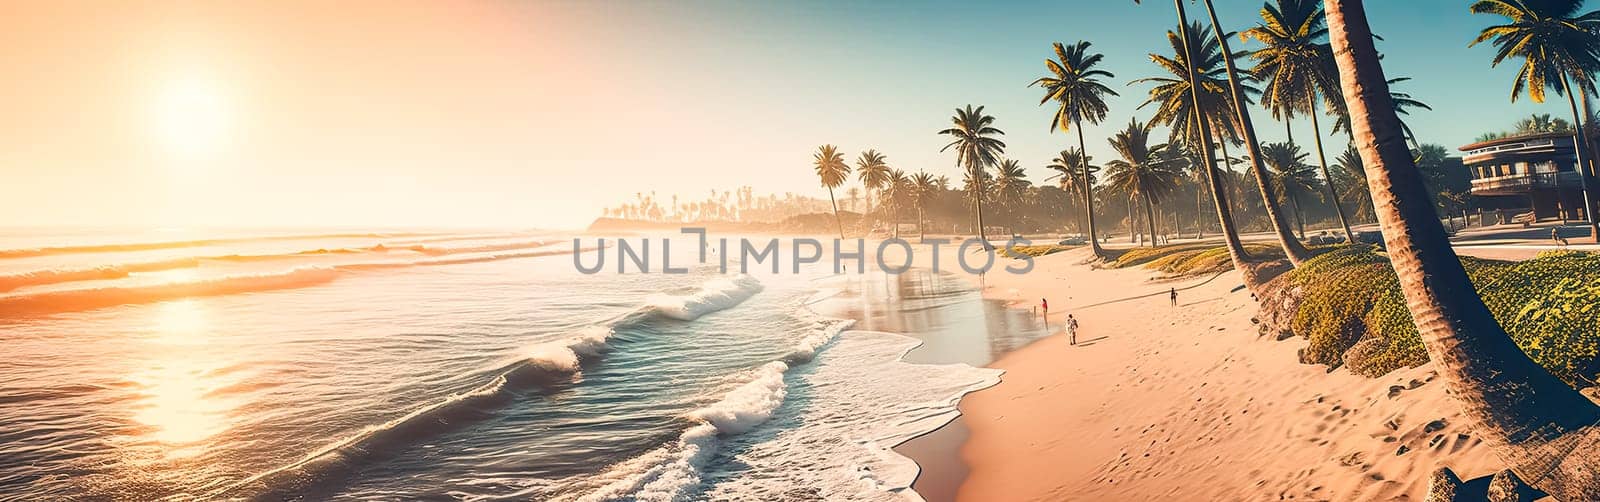 Tropical bliss on a paradise islands palm fringed beach. by Alla_Morozova93